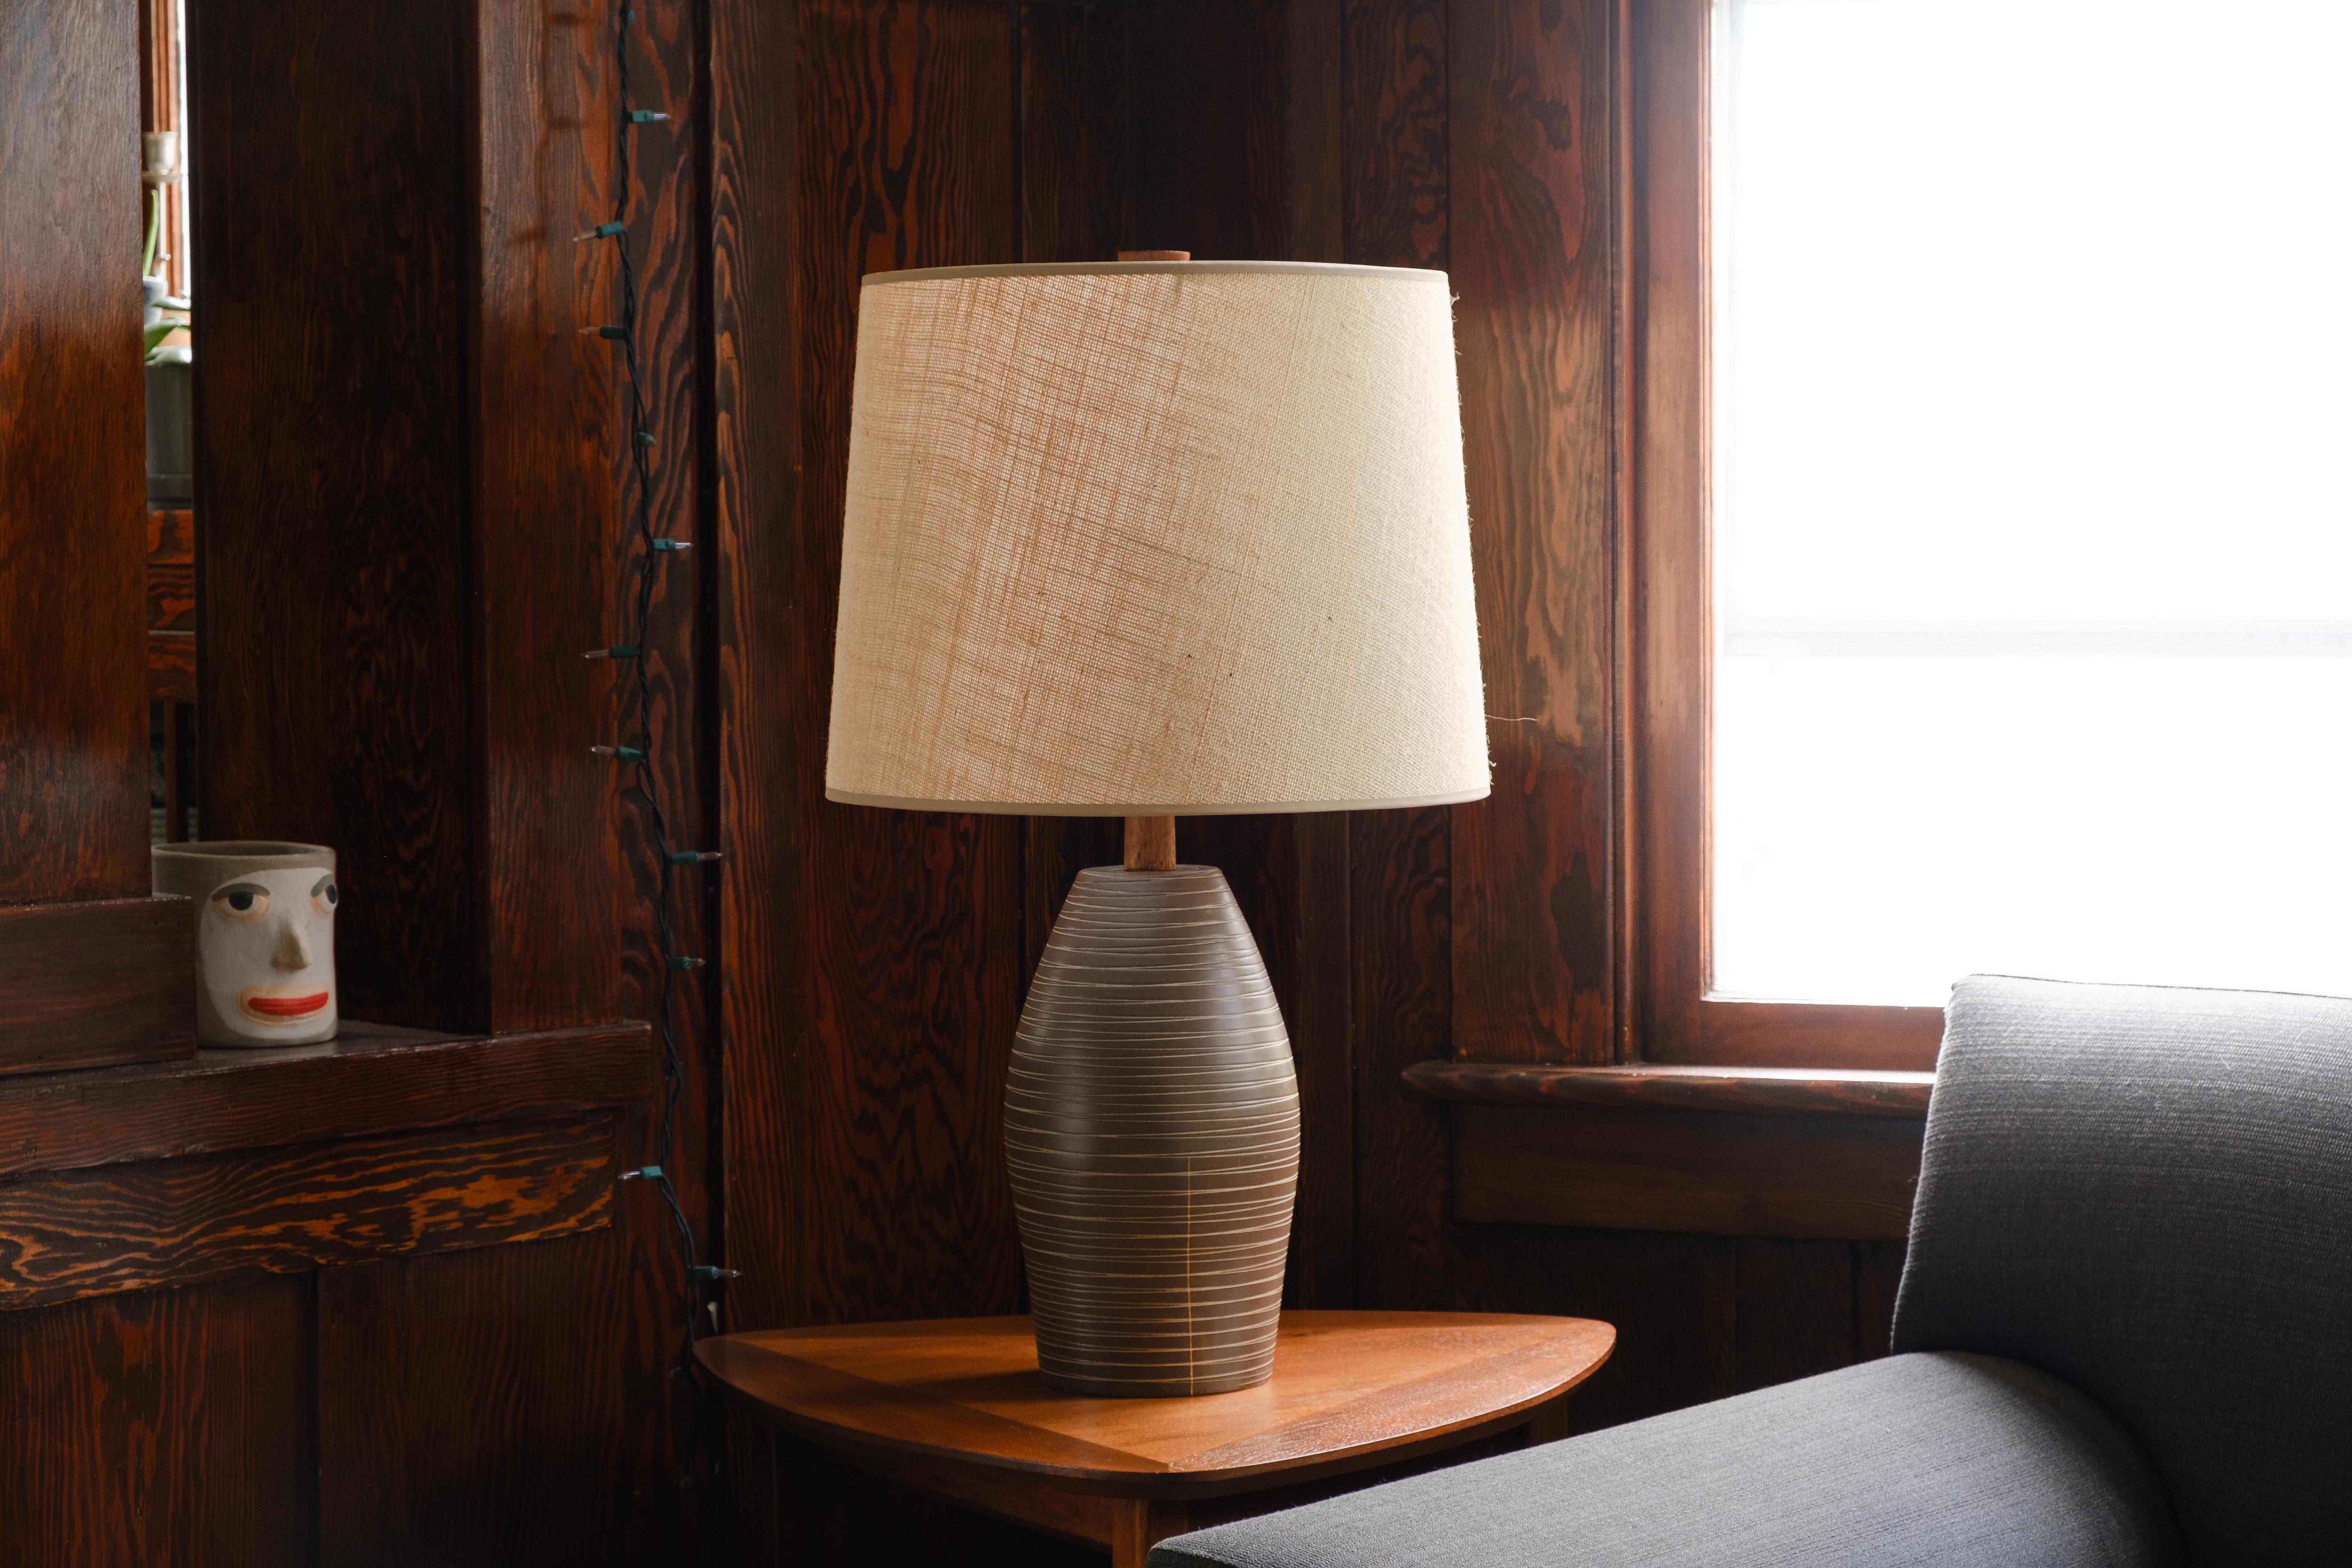 💡 What is it?
—
These signed Martz model #267 lamp come in a matte dark brown glaze and yes, this lamp has been broken and repaired with gold kintsugi. The lamp features an incised, horizontal pattern that runs top to bottom, surrounding the entire